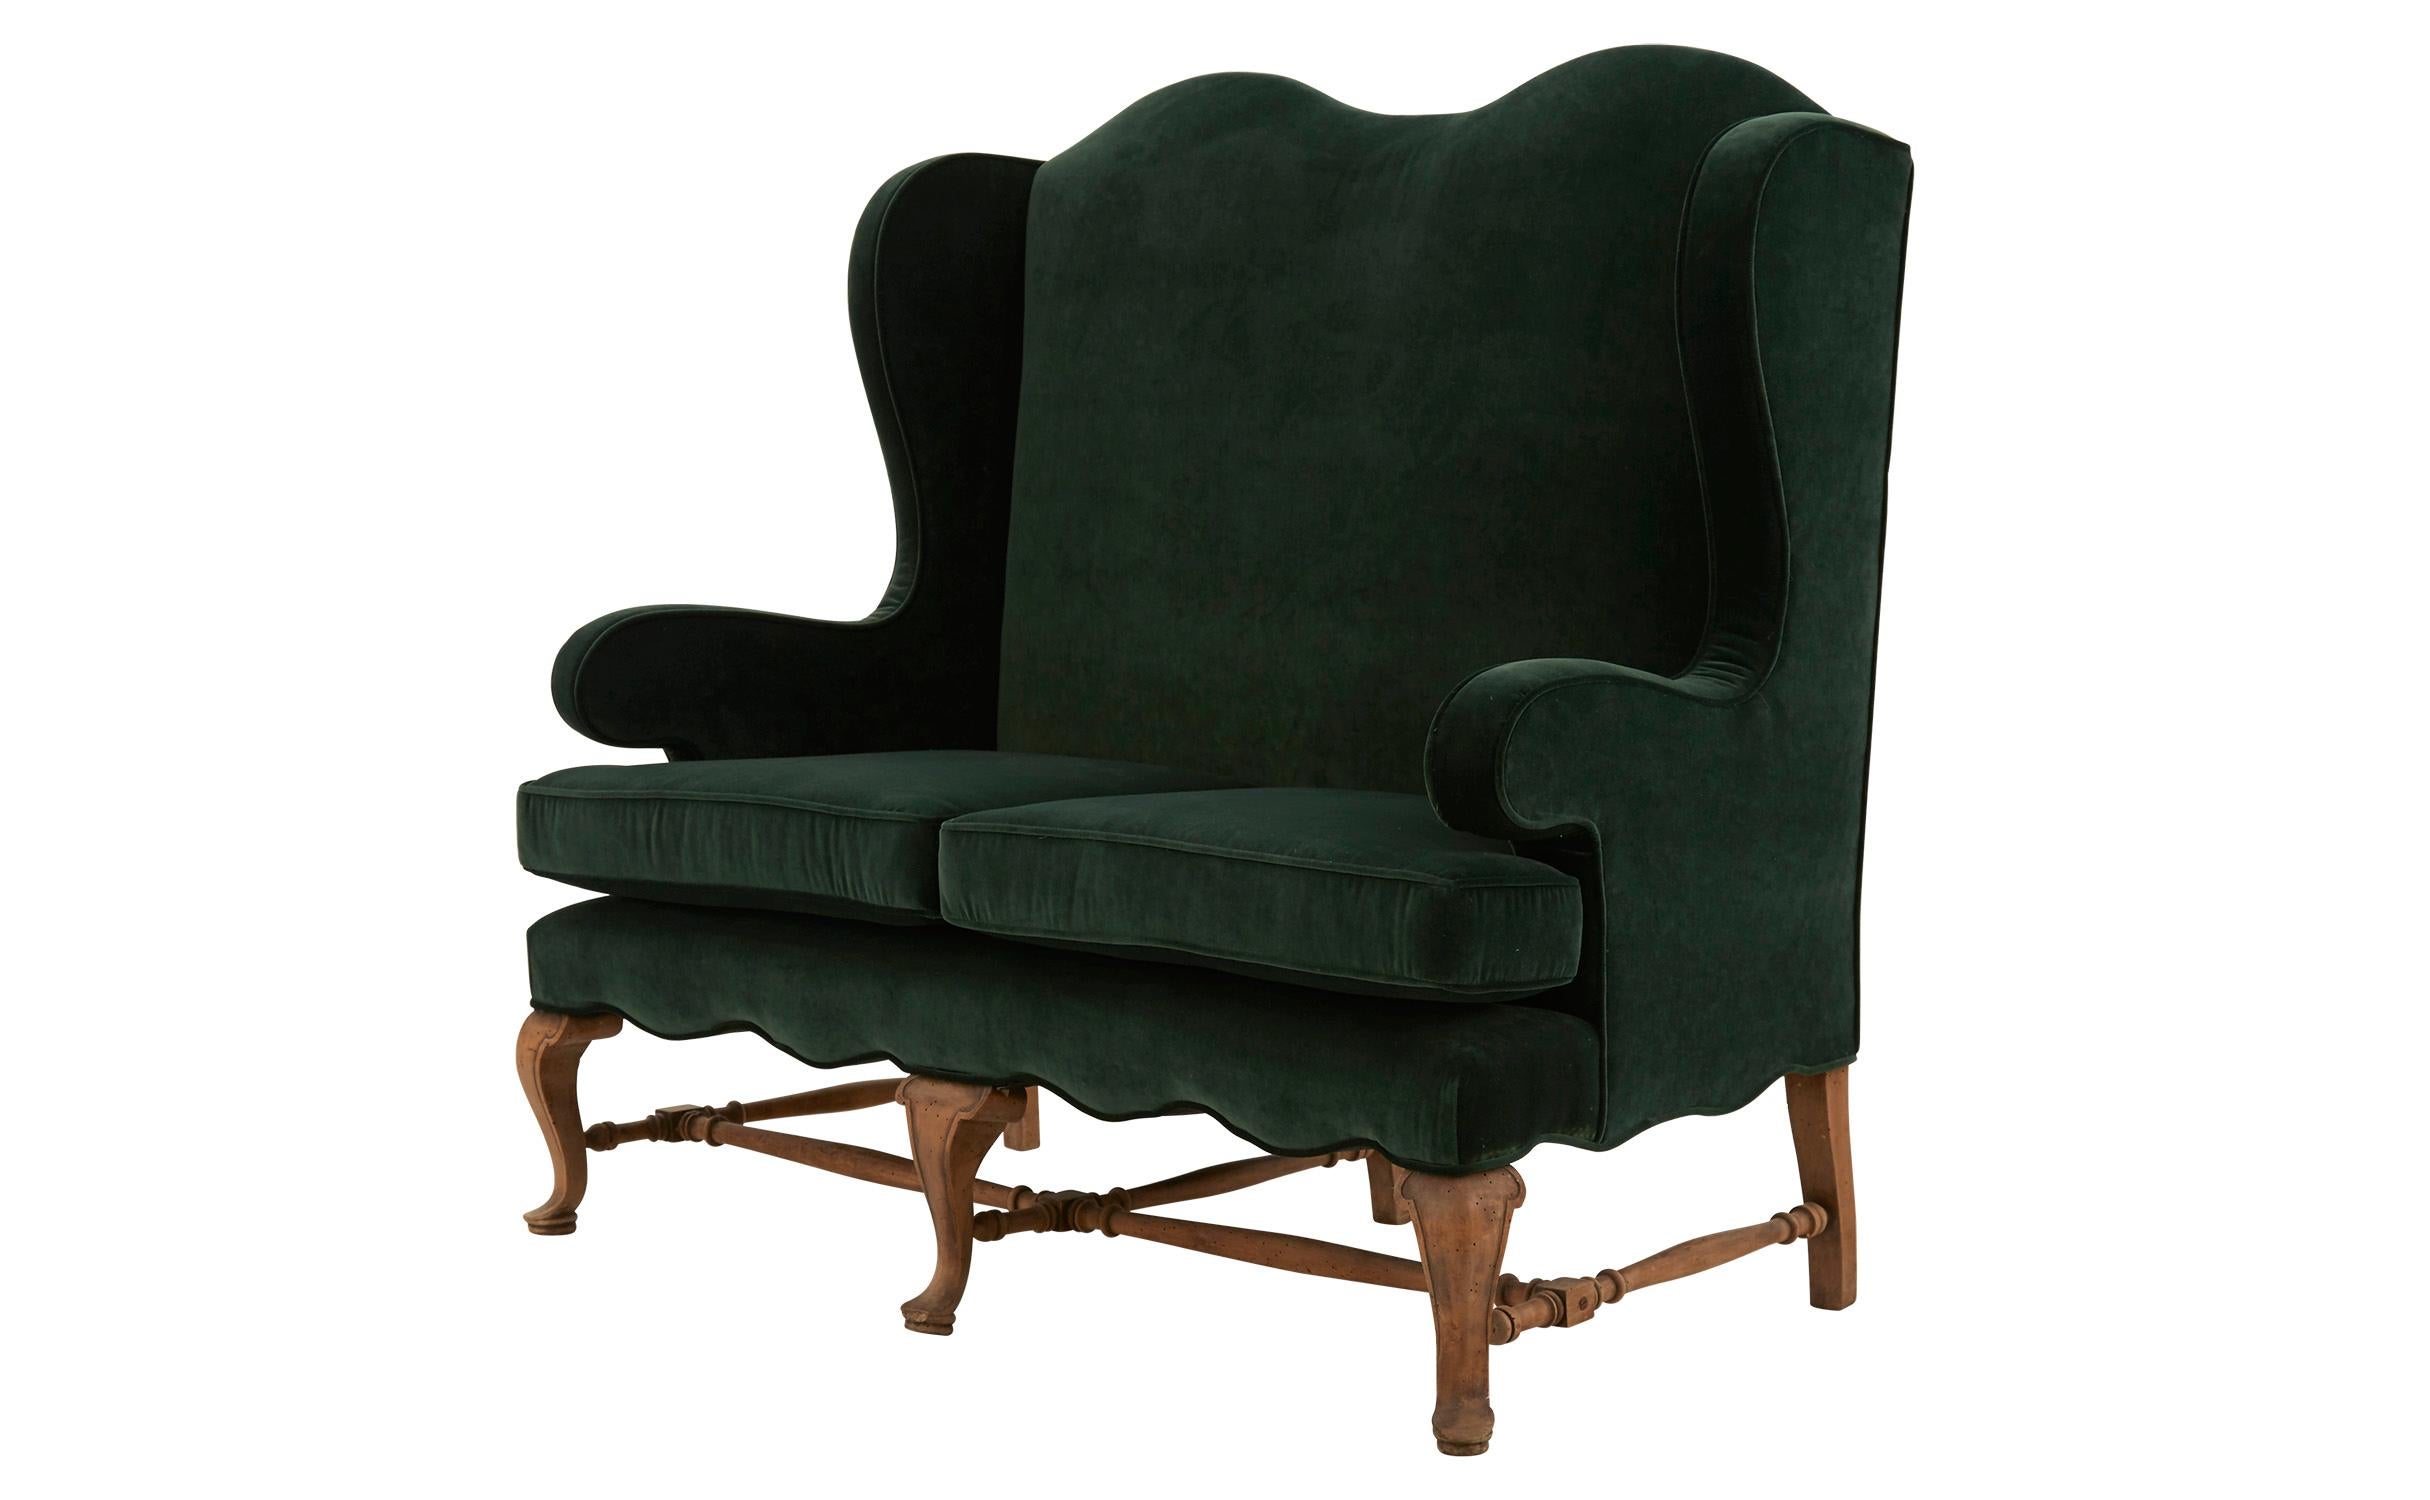 Our Antique Spanish Settee was crafted in Spain in the early 20th century. We’ve given this classic high-backed frame a fresh feel, reupholstering it in sumptuous emerald green velvet. This updated touch pairs nicely with its stripped wood base and